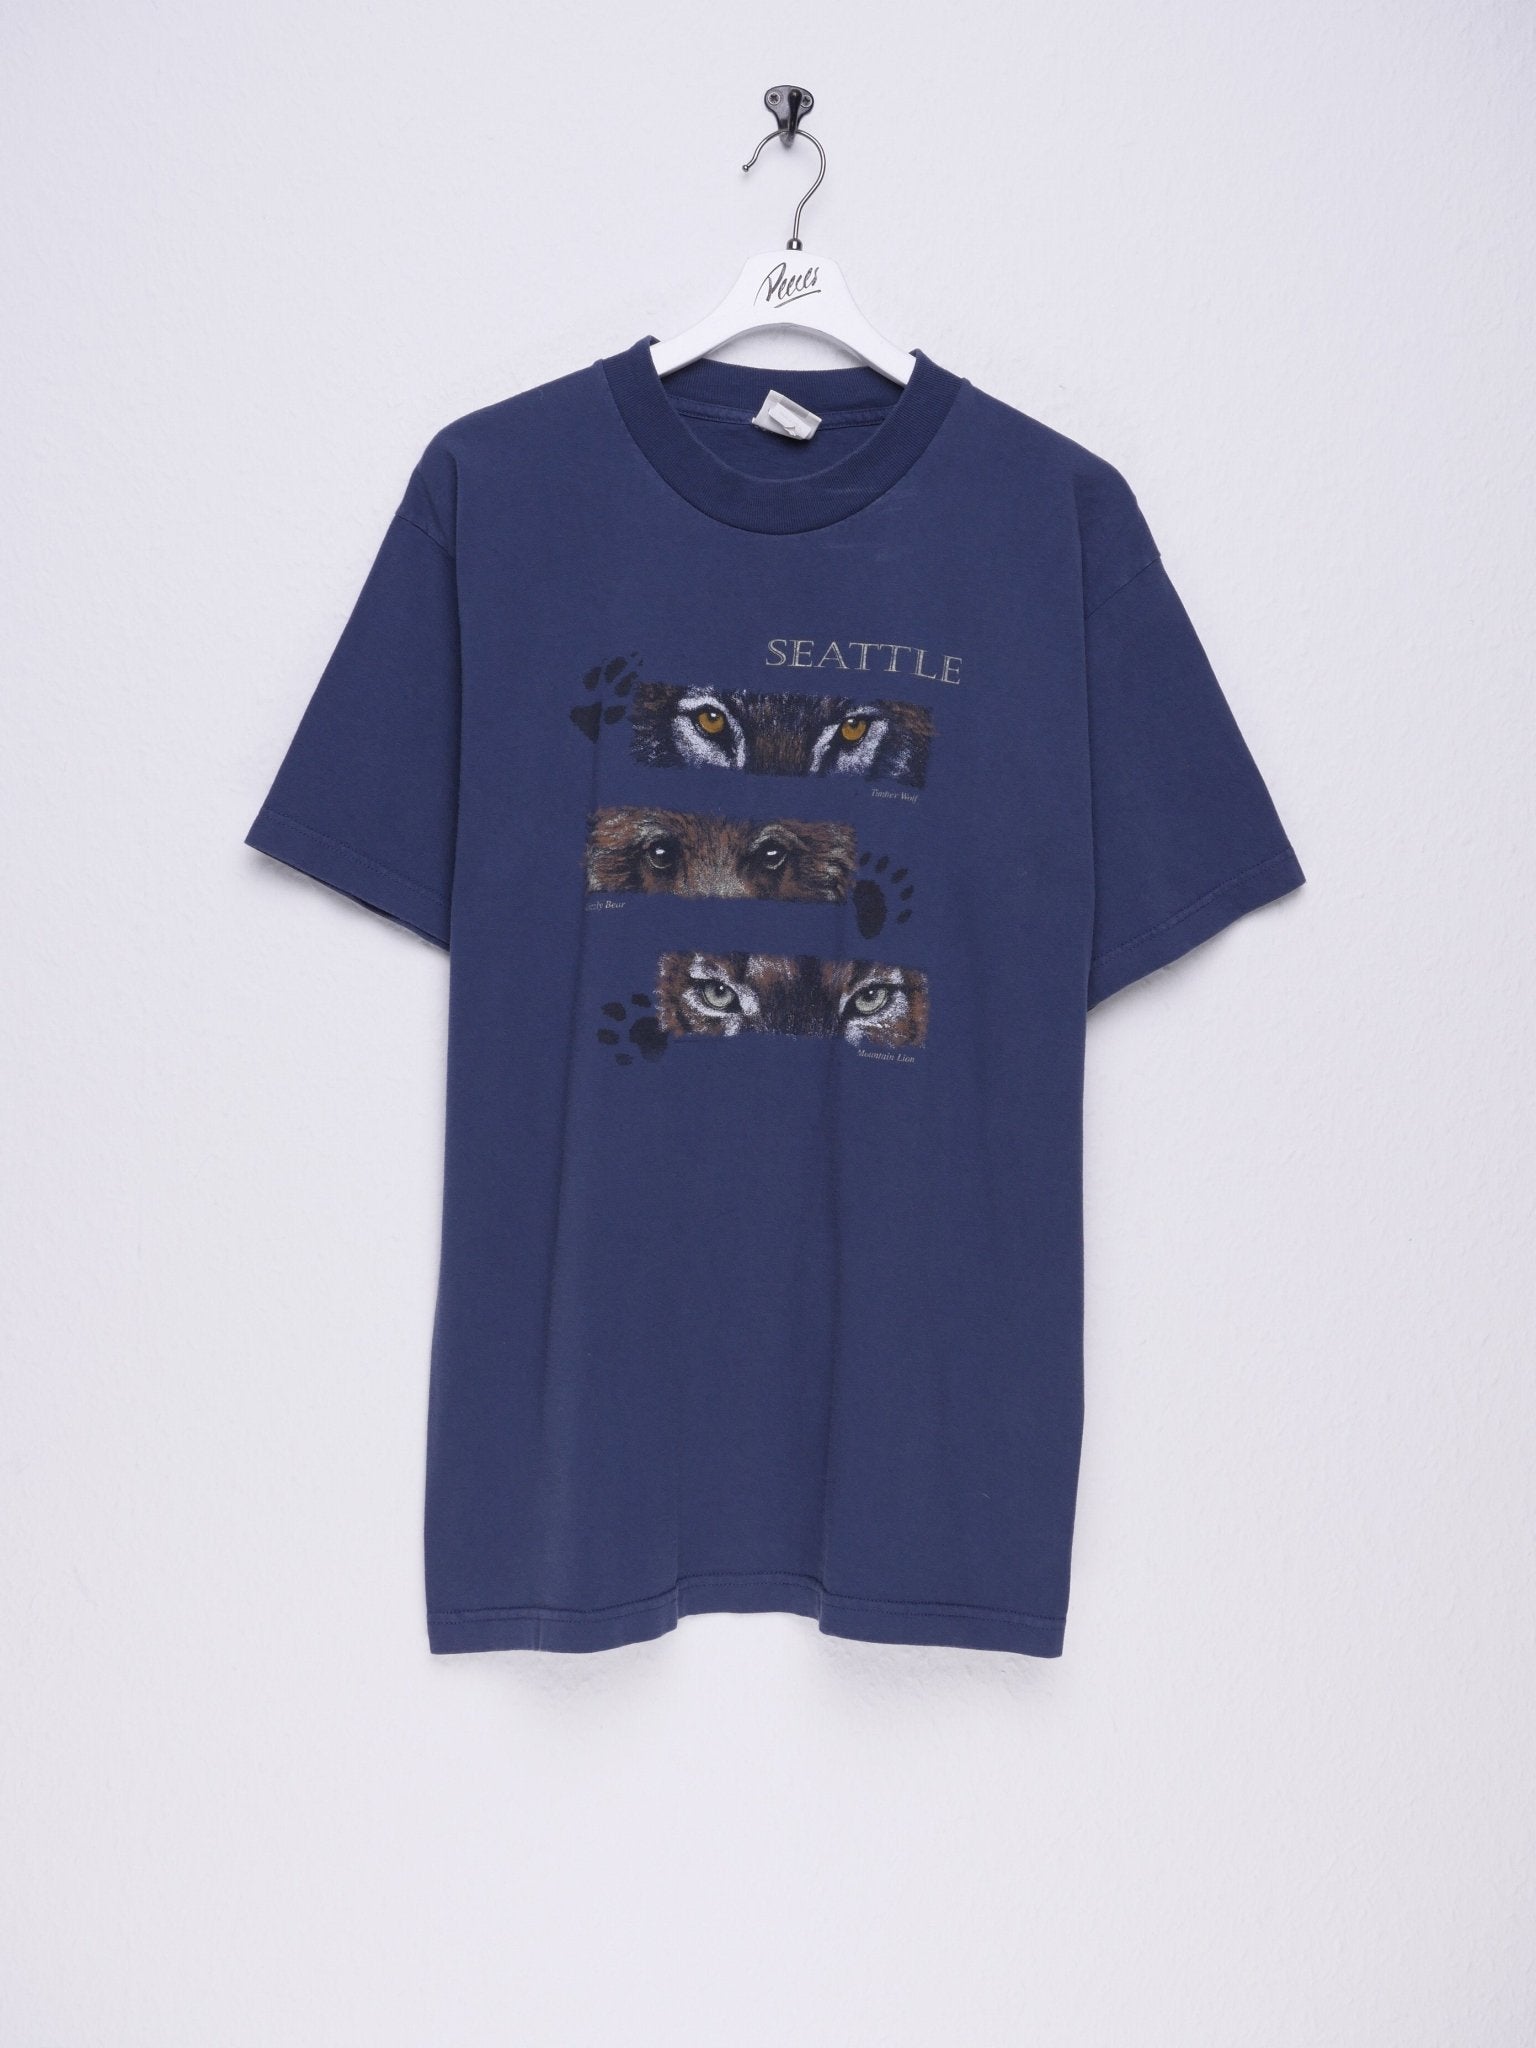 Seattle Wildlife printed Graphic washed Shirt - Peeces